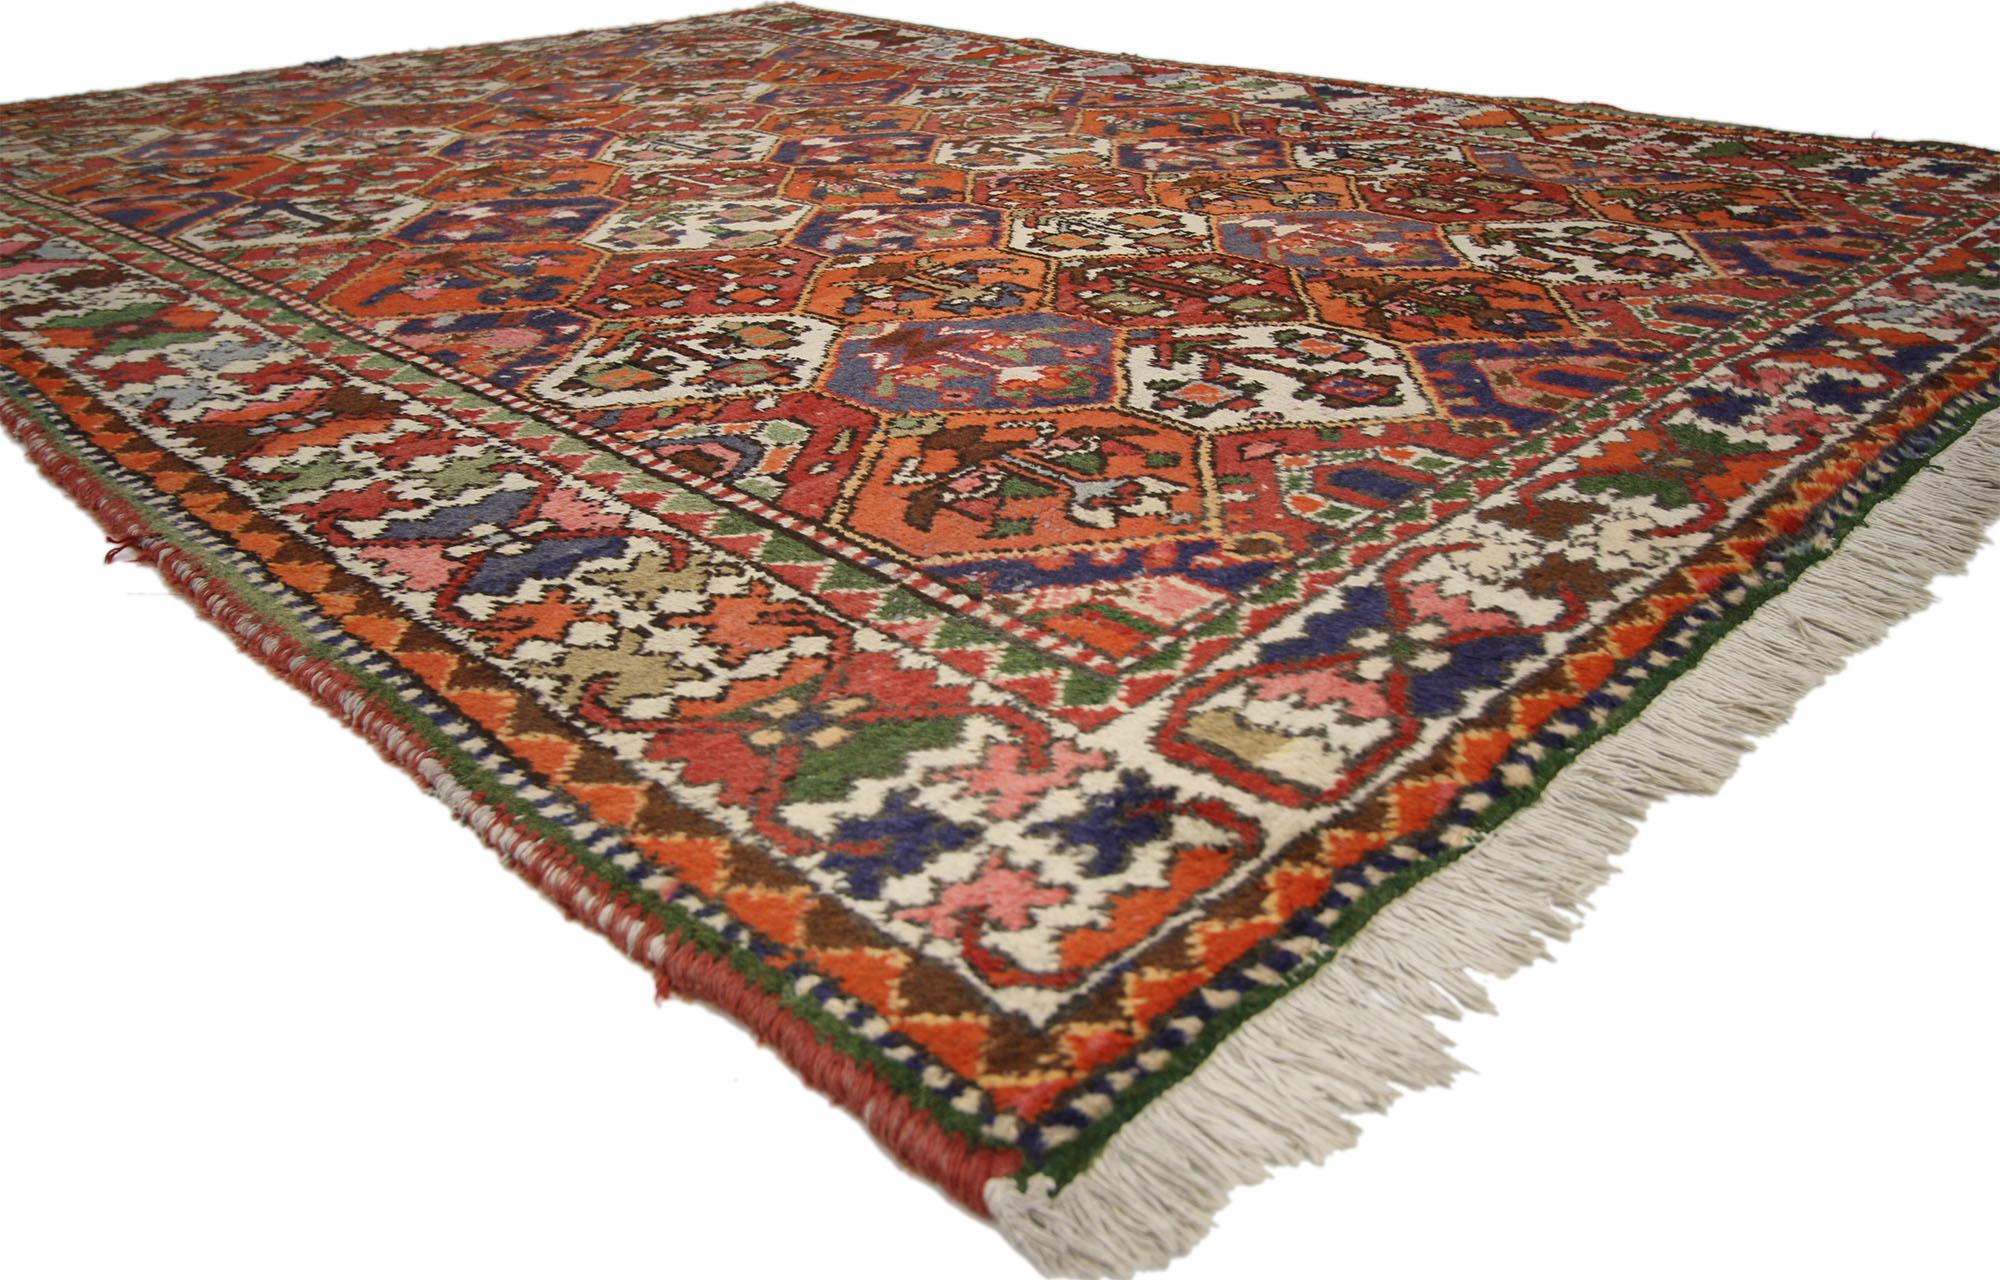 This hand-knotted wool vintage Persian Bakhtiari rug features a Four Seasons garden design in a traditional color palette. Stylishly composed with an intimate patina, this vintage Bakhtiari rug reflects the finer points of timeless Persian rug